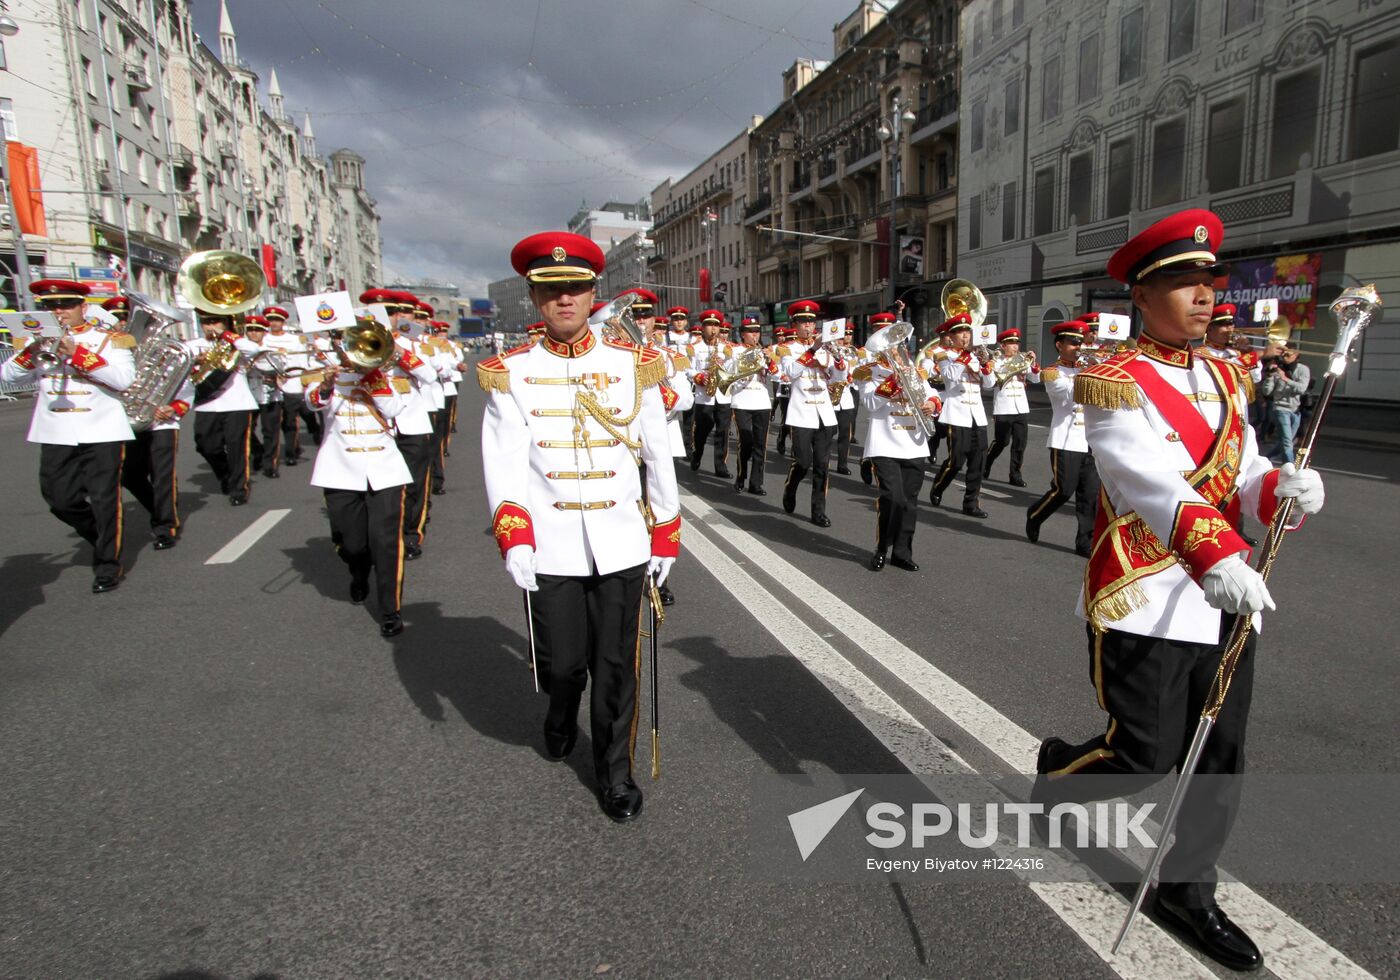 Spasskaya Tower Festival participants march on Moscow streets